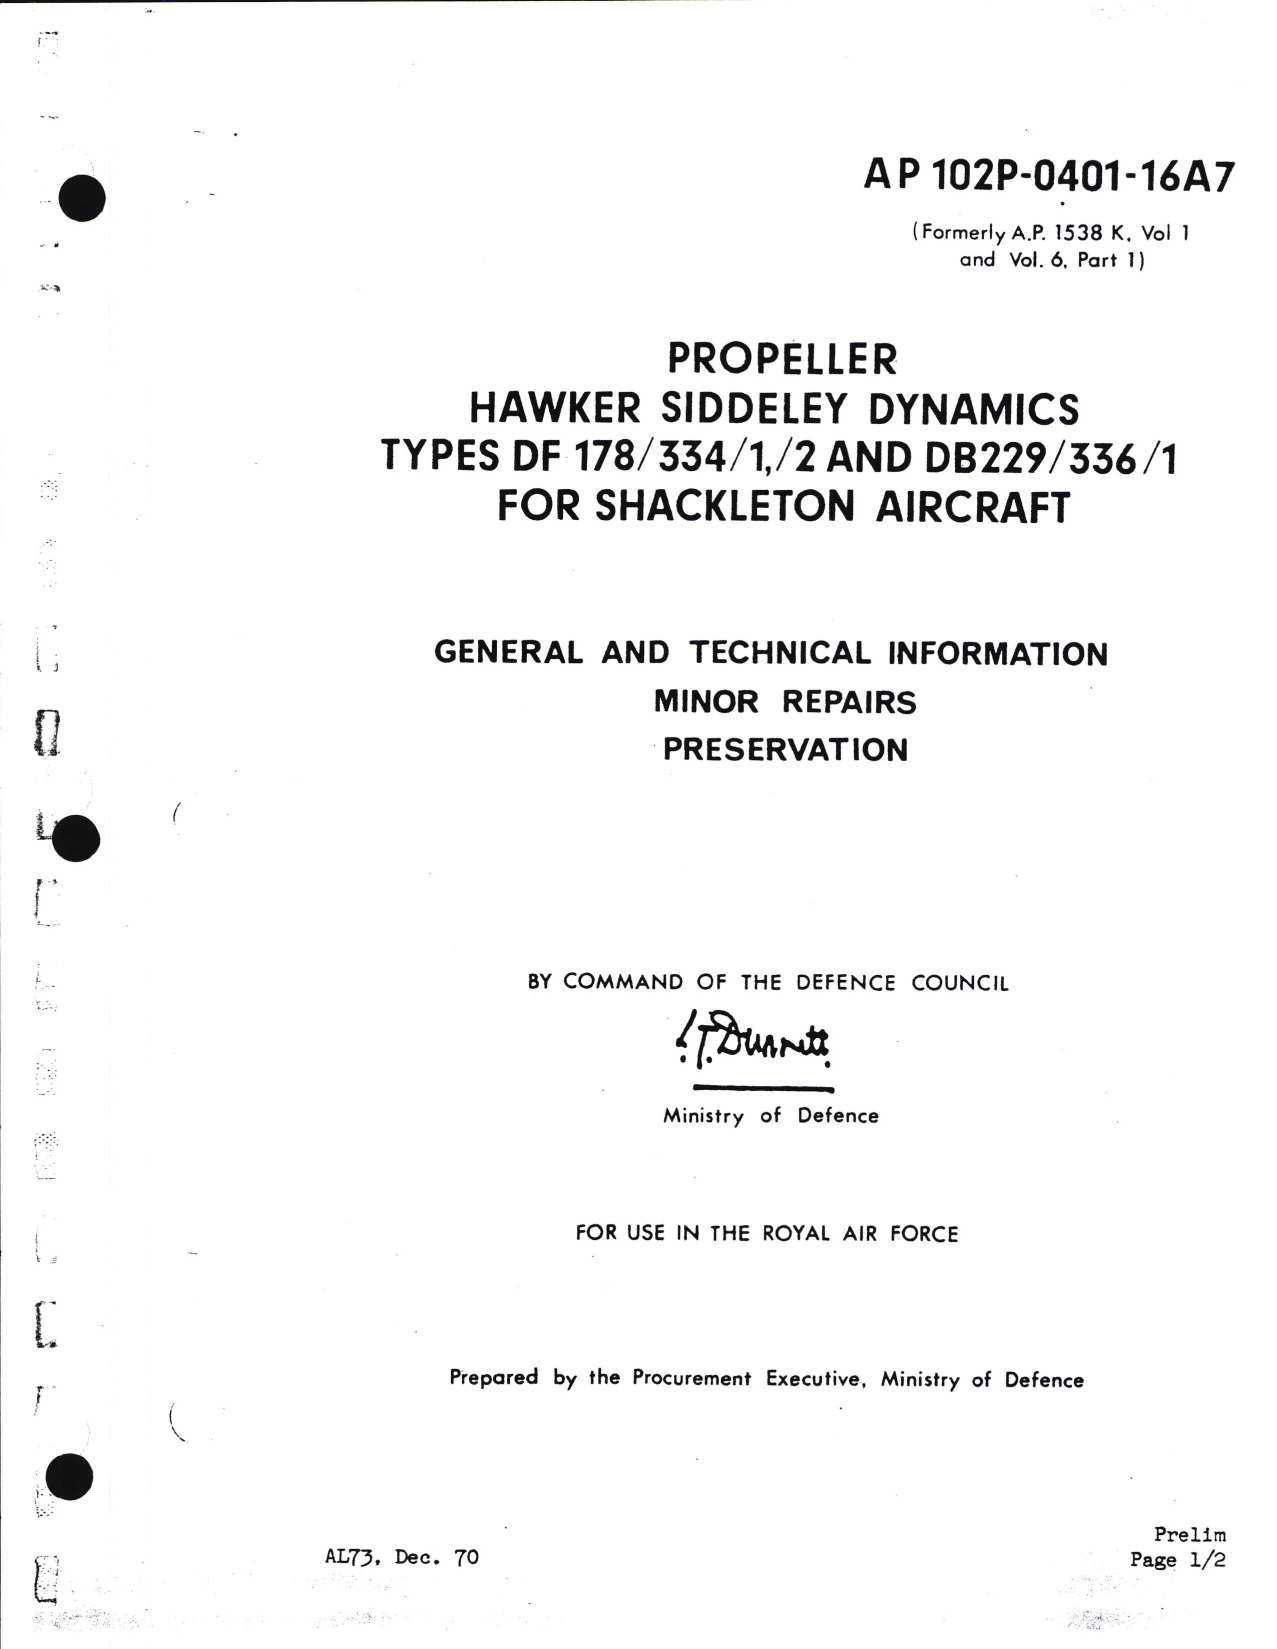 Sample page 1 from AirCorps Library document: Propeller Types DF 178/334/1,/2 and DB299/336/1 For Shackleton Aircraft